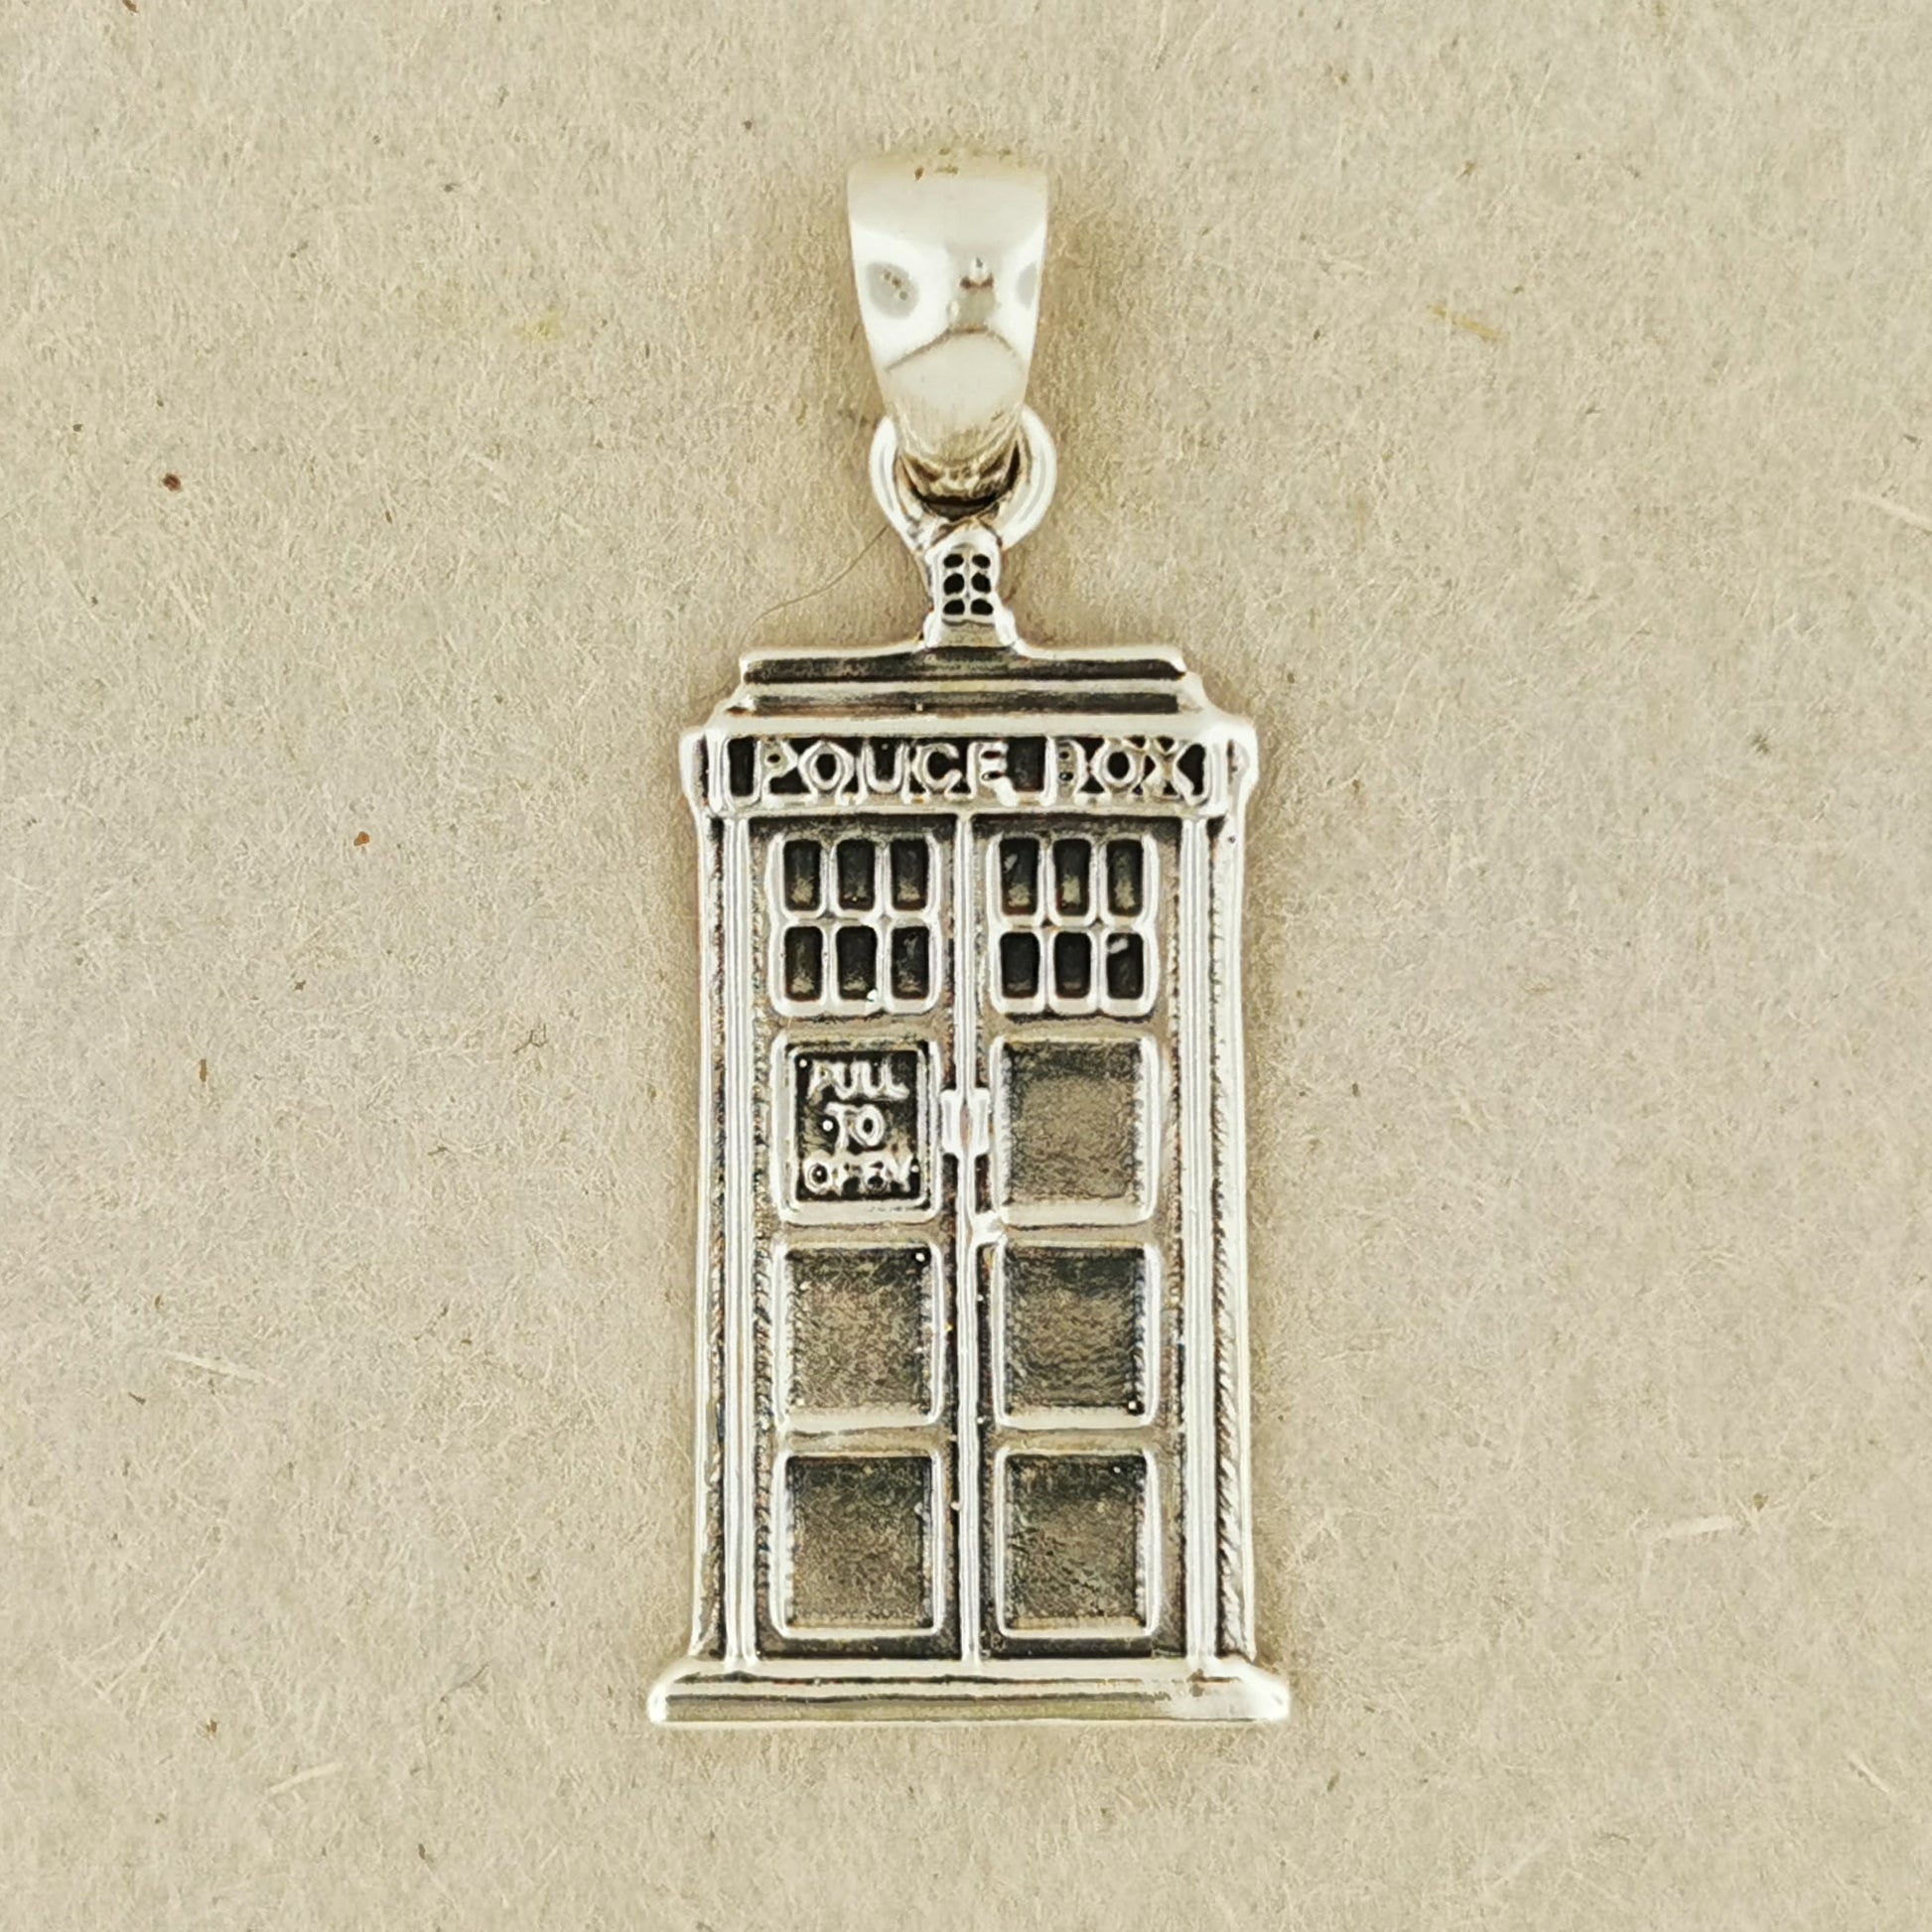 Tardis Charm Pendant from Dr Who in Sterling Silver or Antique Bronze, Silver  Tardis Pendant, Bronze Tardis Pendant, Scifi Silver Pendant, Bronze Scifi Pendant, Dr Who Silver Jewelry, Dr Who Silver Jewellery, Bronze Dr Who Jewelry, Bronze Dr Who Jewellery, Bronze Tardis Charm, Silver Tardis Charm, Phone Box Pendant, Silver Geek Pendant, Silver Geek Jewelry, Bronze Geek Pendant, Bronze Geek Jewelry